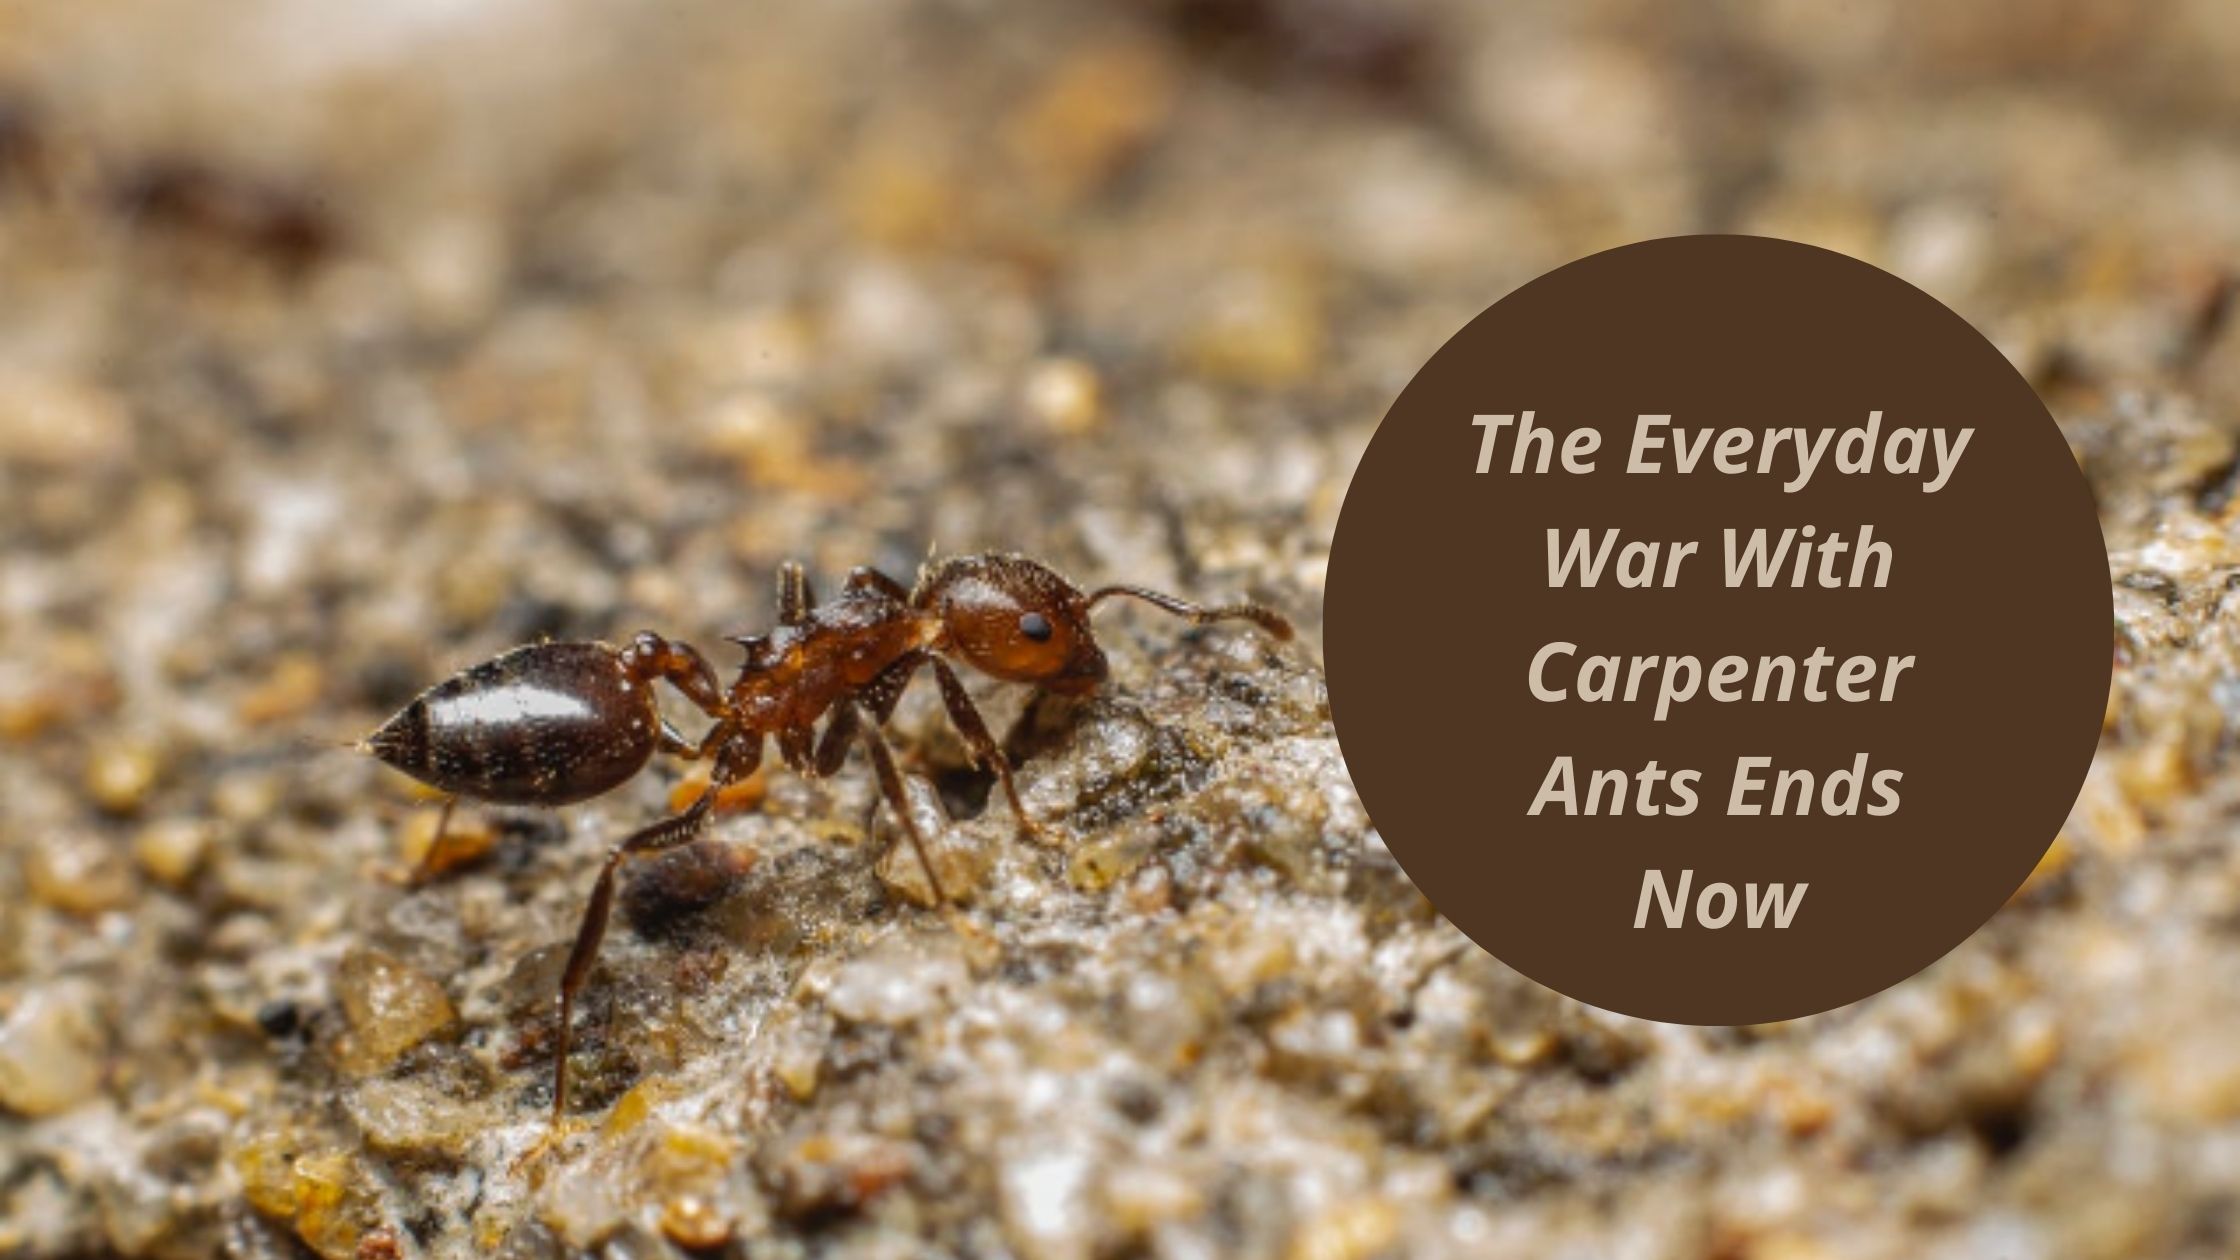 The Everyday War With Carpenter Ants Ends Now